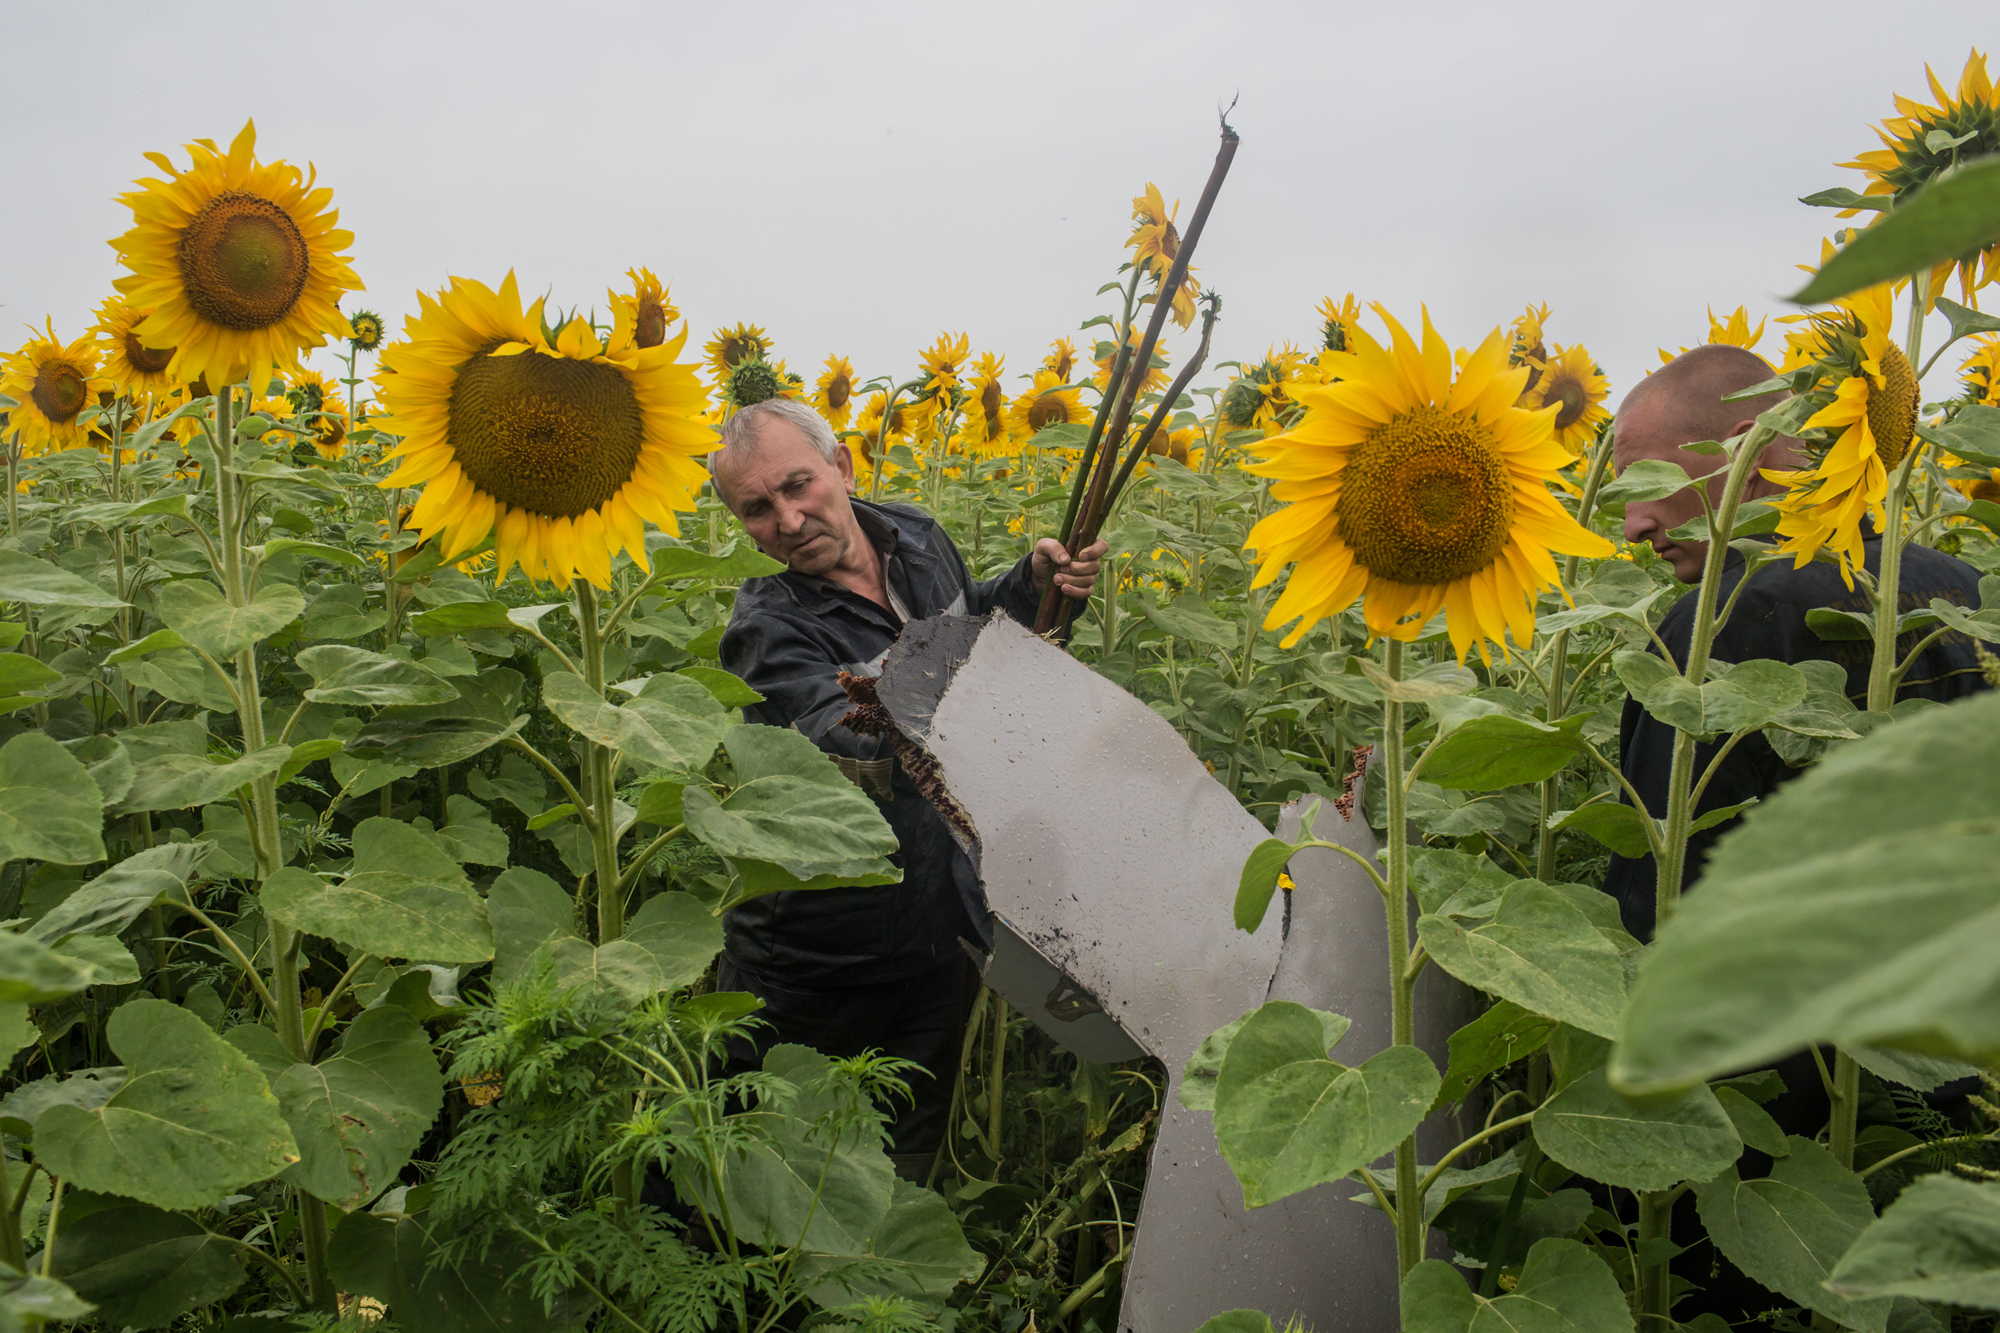 Miners inspect a piece of debris found in a field from an Air Malaysia plane on July 18, 2014 in Grabovka, Ukraine.